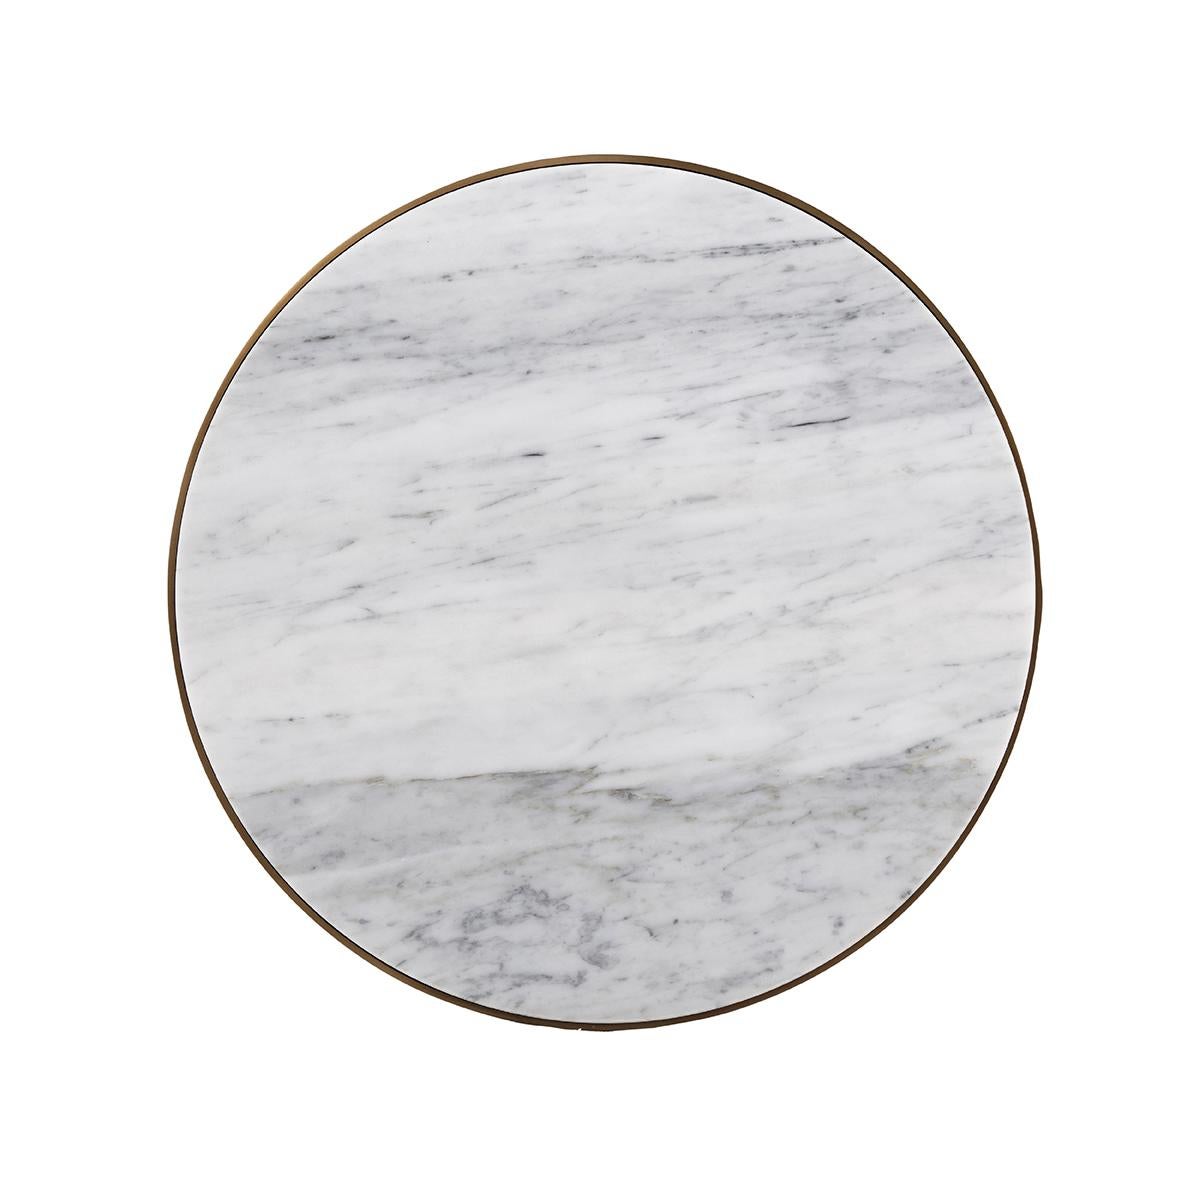 With a round Bianco Carraro marble top on a brushed brass finish metal base with tapering legs.

Dimensions: 19.75